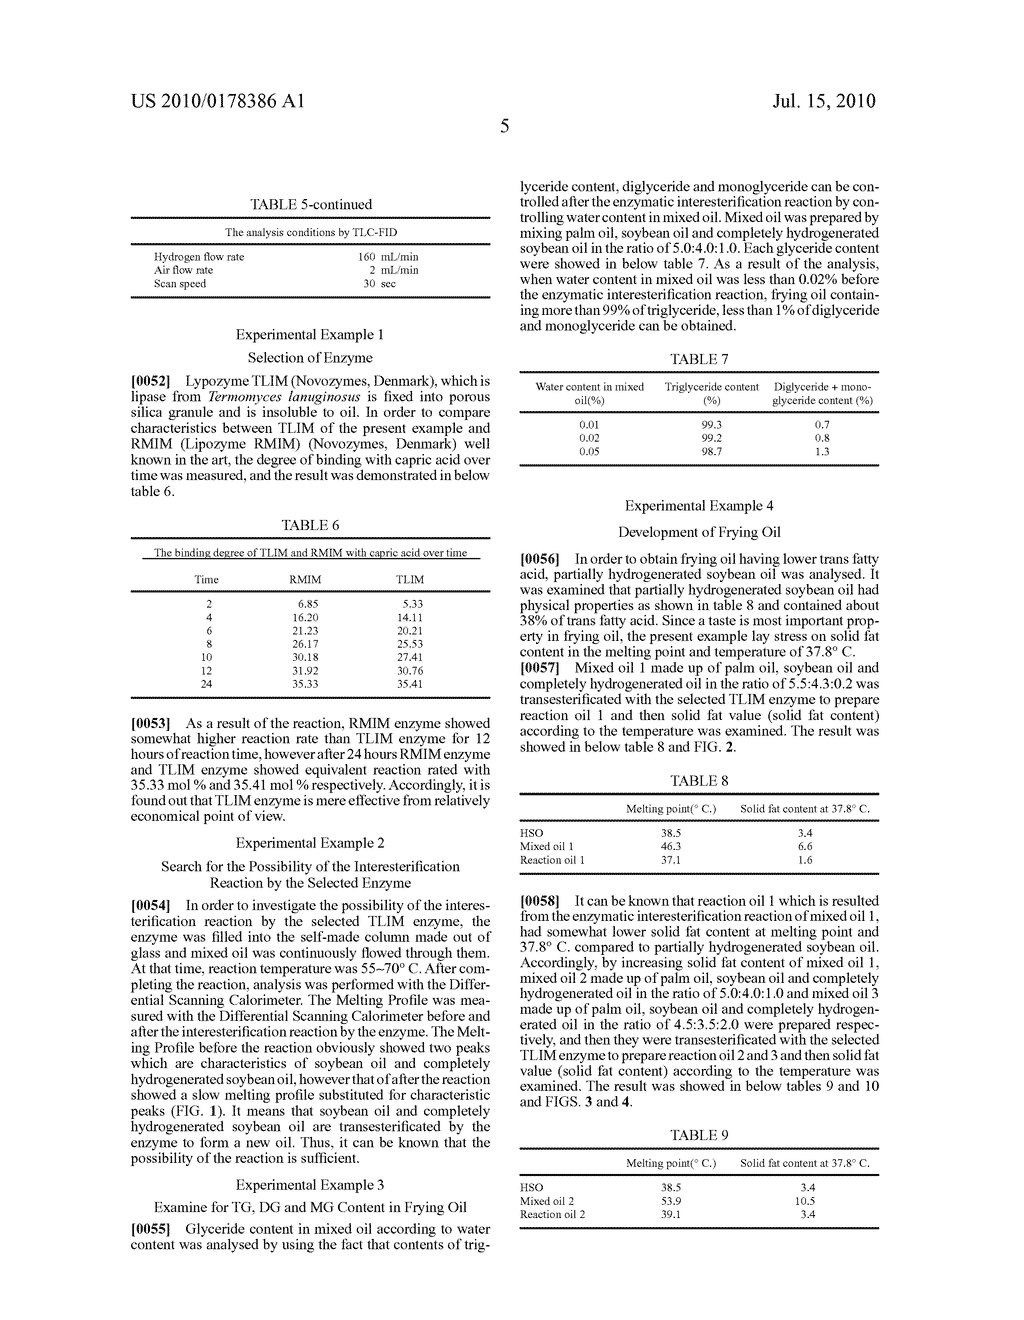 TRANS FATTY ACID FREE FAT FOR FRYING PRODUCED BY ENZYMATIC INTERESTERIFICATION AND METHOD FOR PREPARING THE SAME - diagram, schematic, and image 10